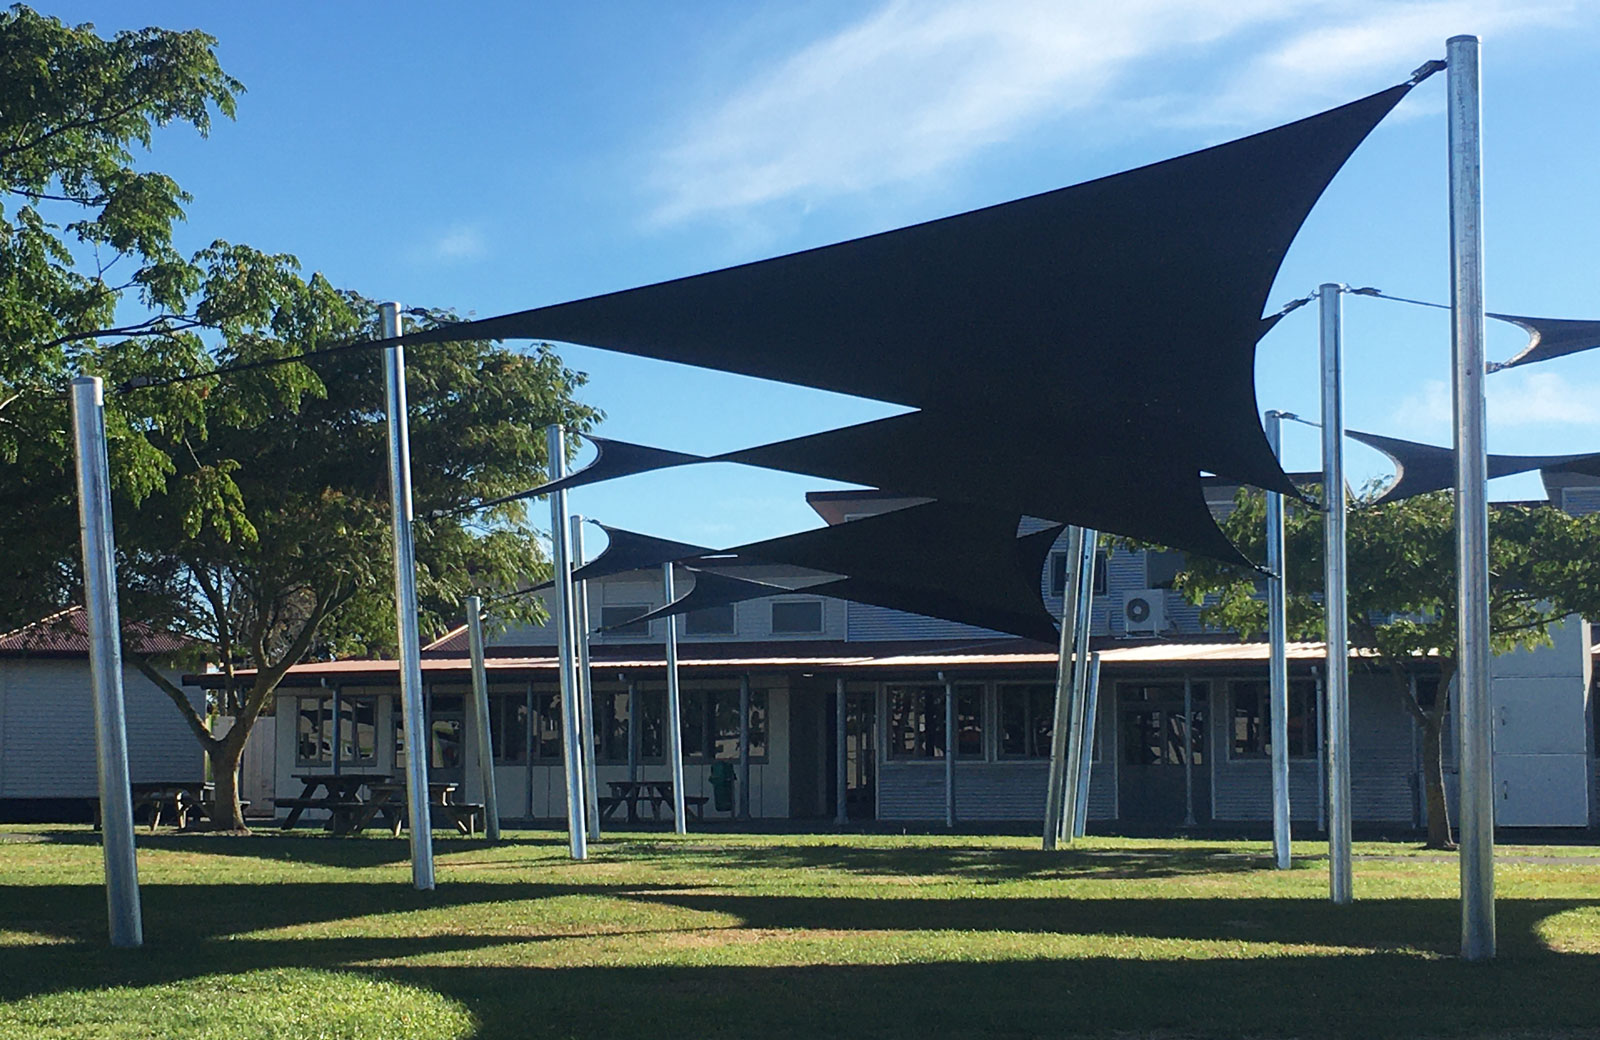 Sunshade Hawkes Bay creates large scale shade sail solution for Wairoa College